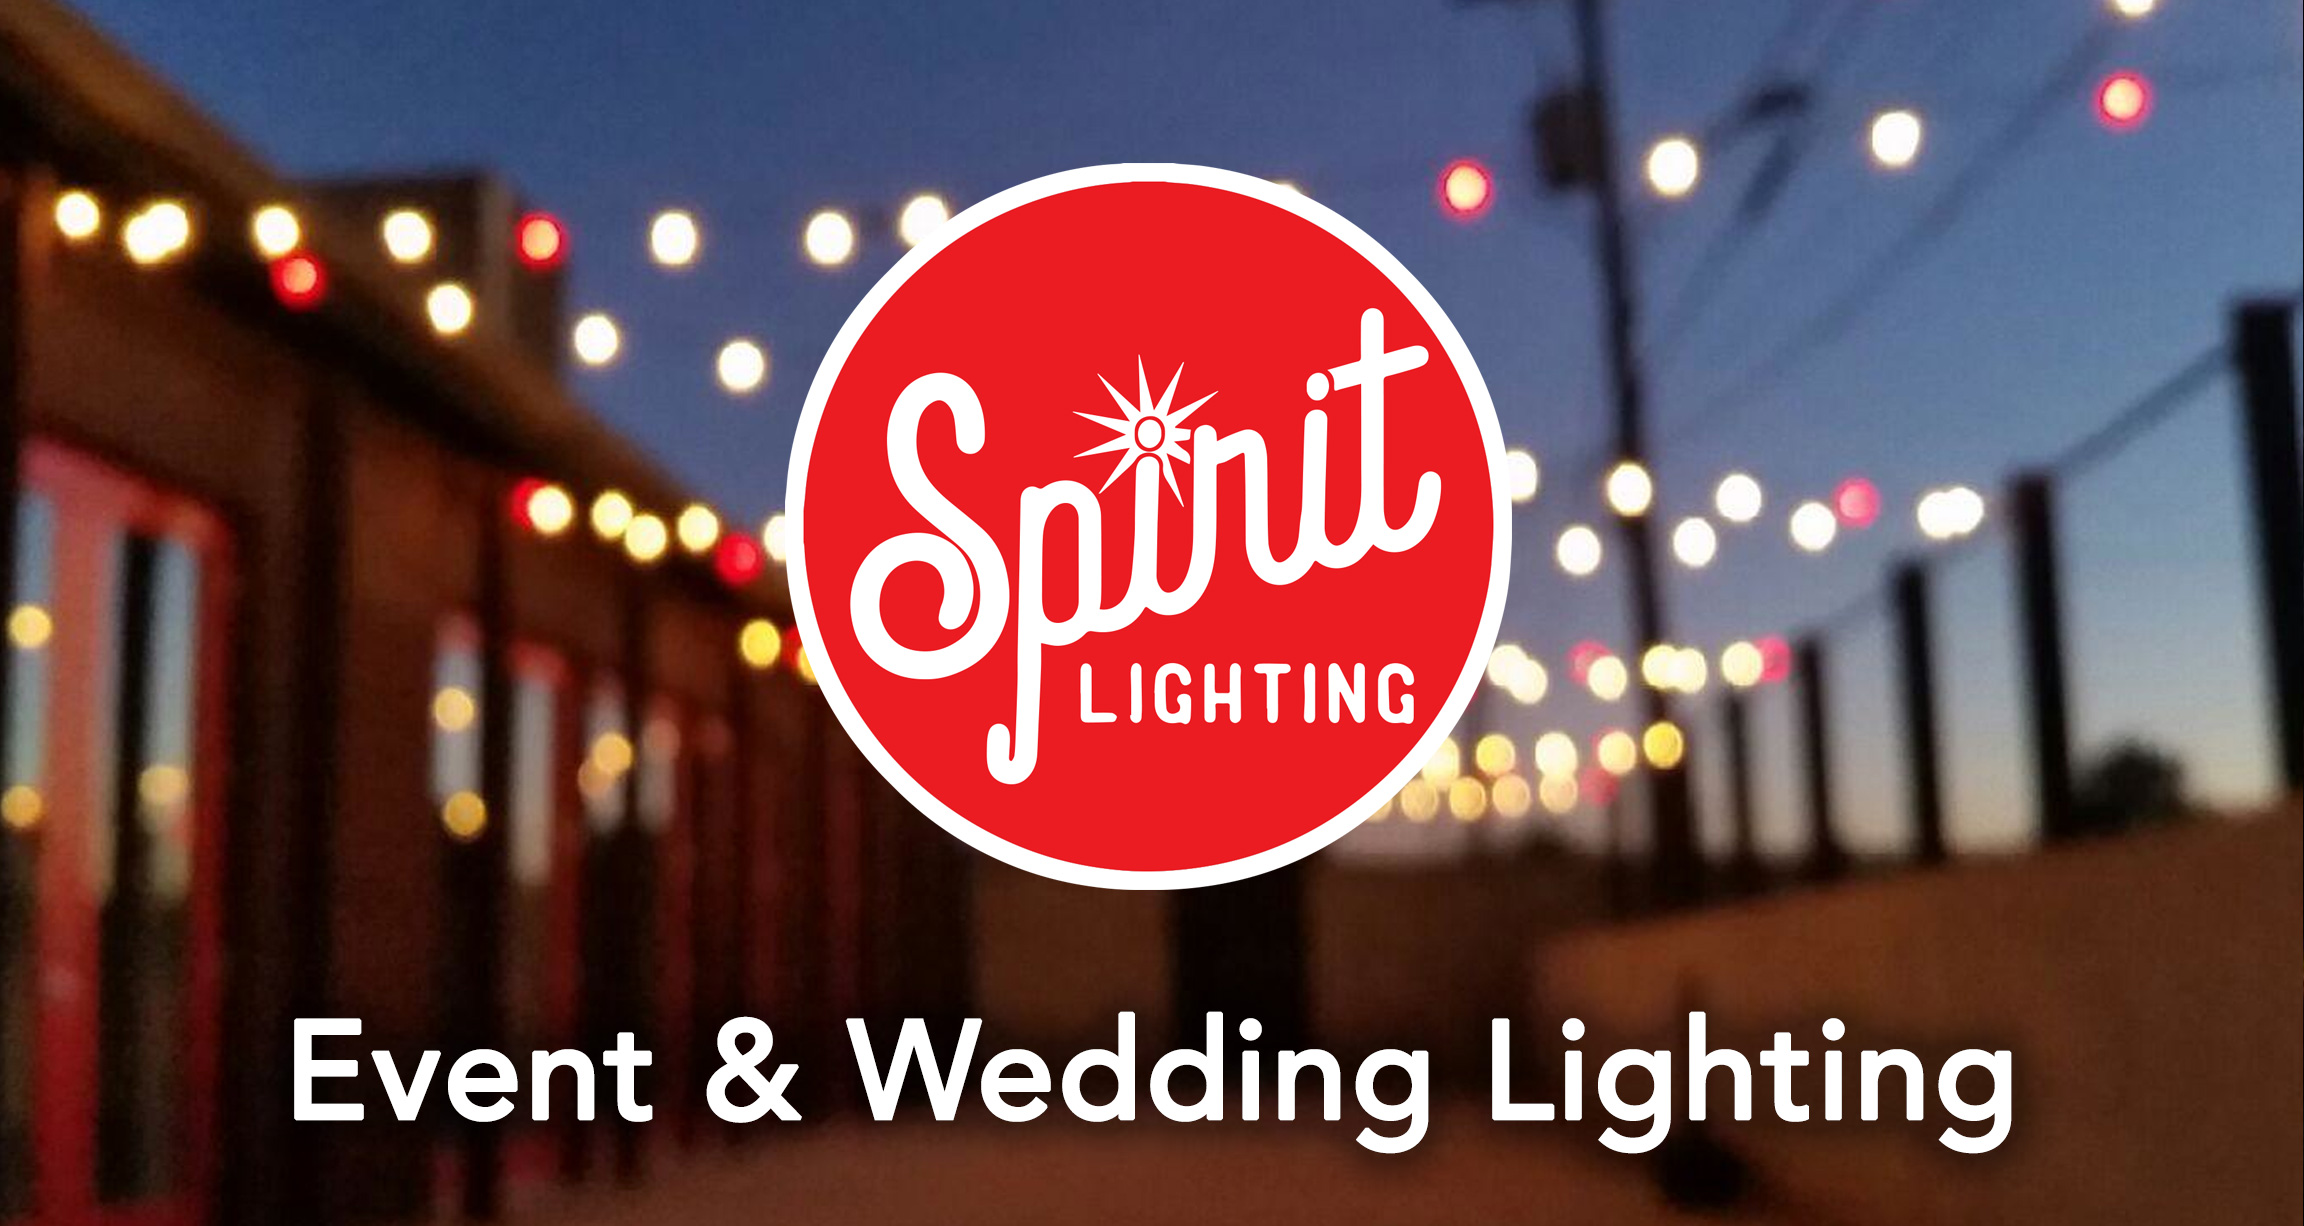 SPIRIT LIGHTING WILL DESIGN A DISPLAY FOR YOUR EVENT THAT BALANCES FUNCTION AND FESTIVENESS.